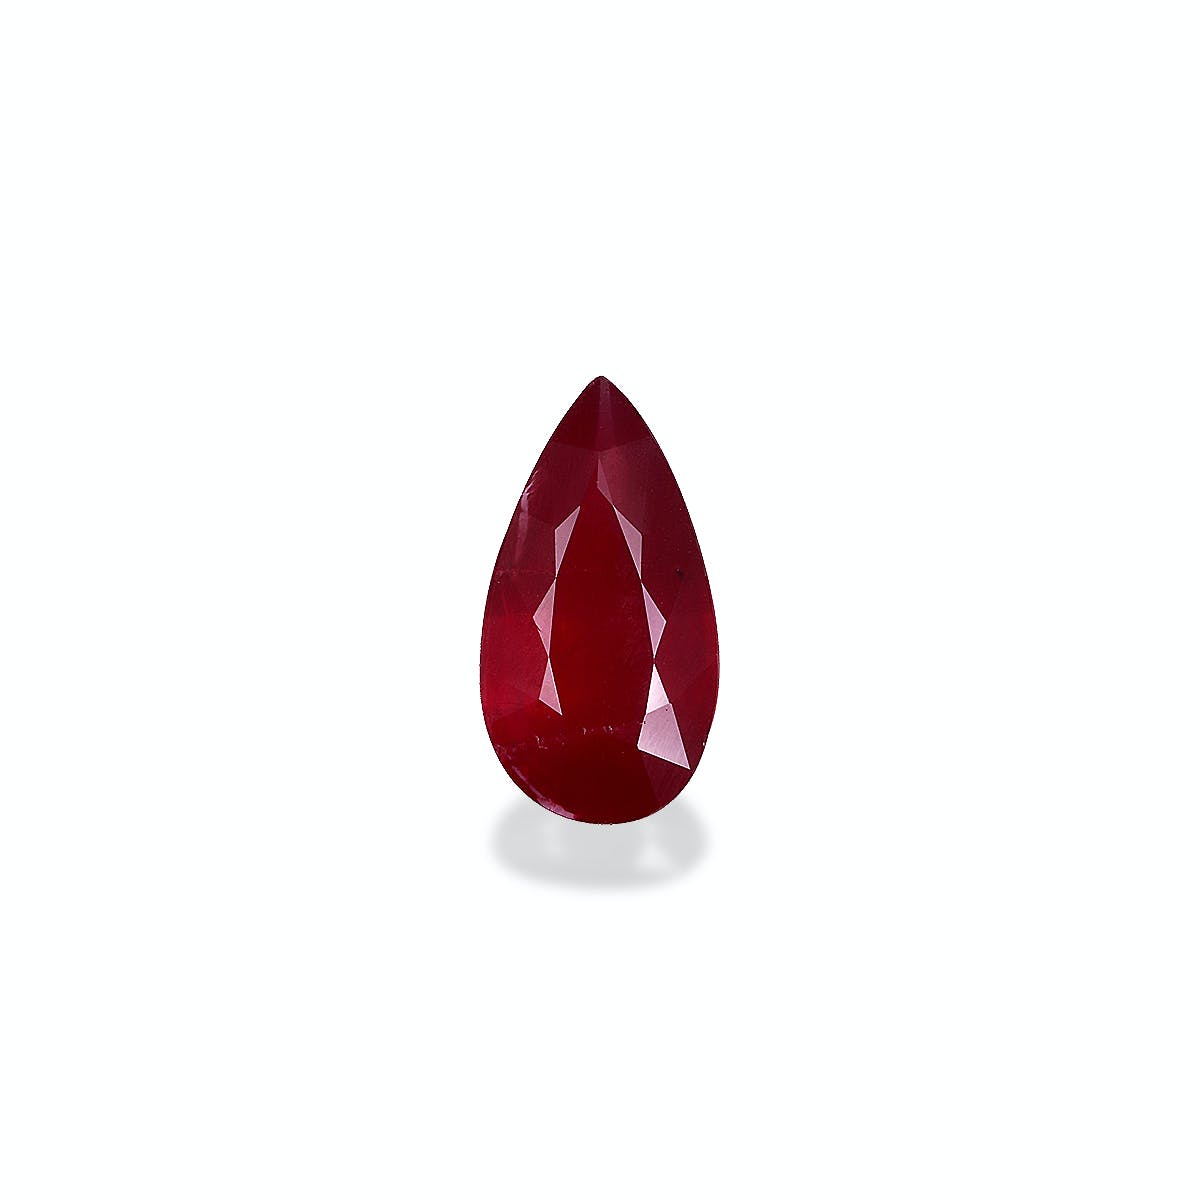 Mozambique Ruby Pear Fine Step Cut Red